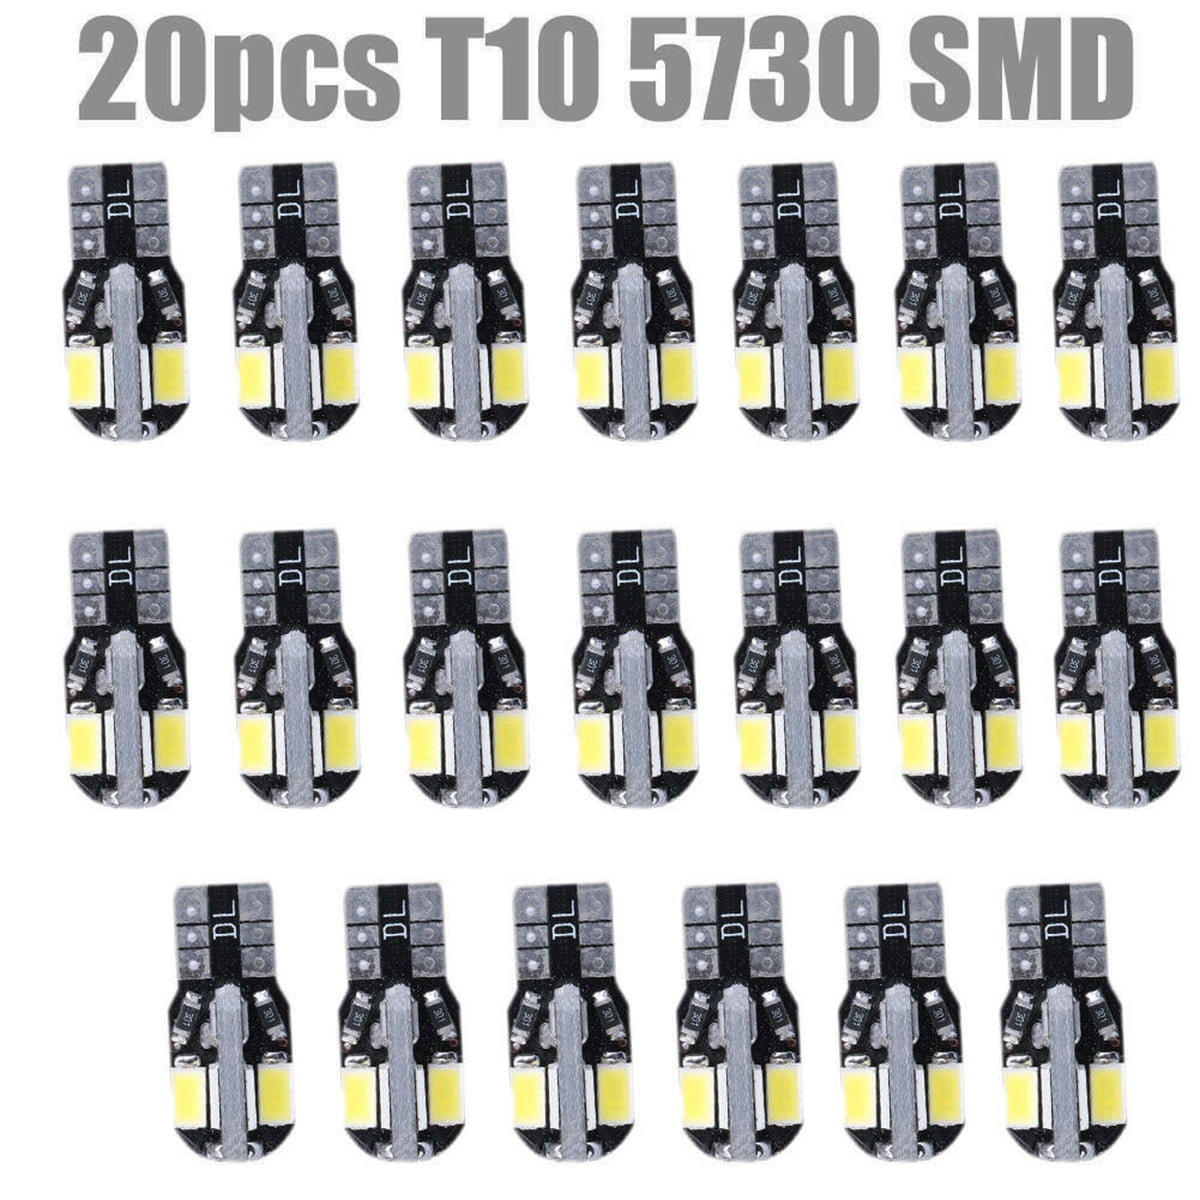 AMAZENAR 30-Pack Pink Replacement Stock # 194 T10 168 2825 W5W 175 158 Bulb 5050 5 SMD LED Light,12V Car Interior Lighting for Map Dome Lamp Trunk Dashboard Parking Lights Best Value